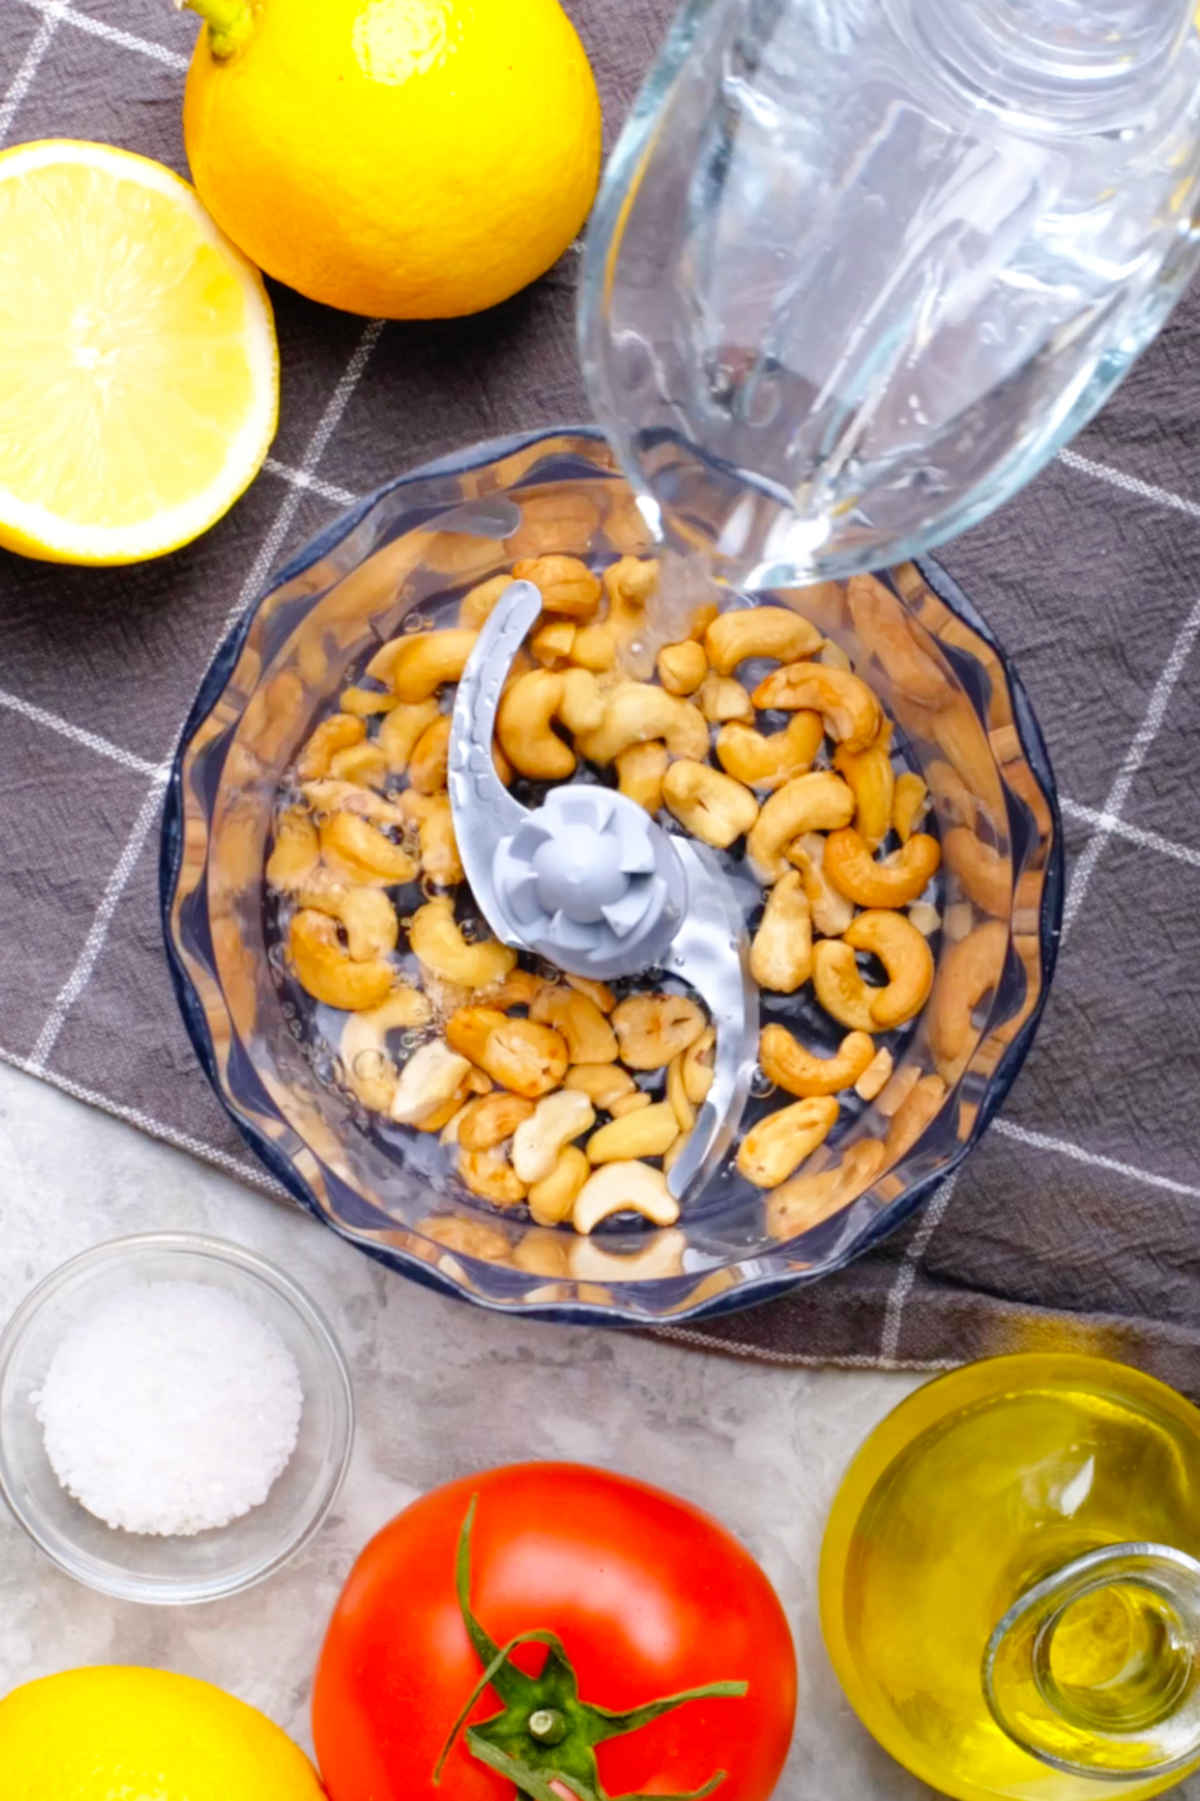 Cashews in a food processor with water being added.